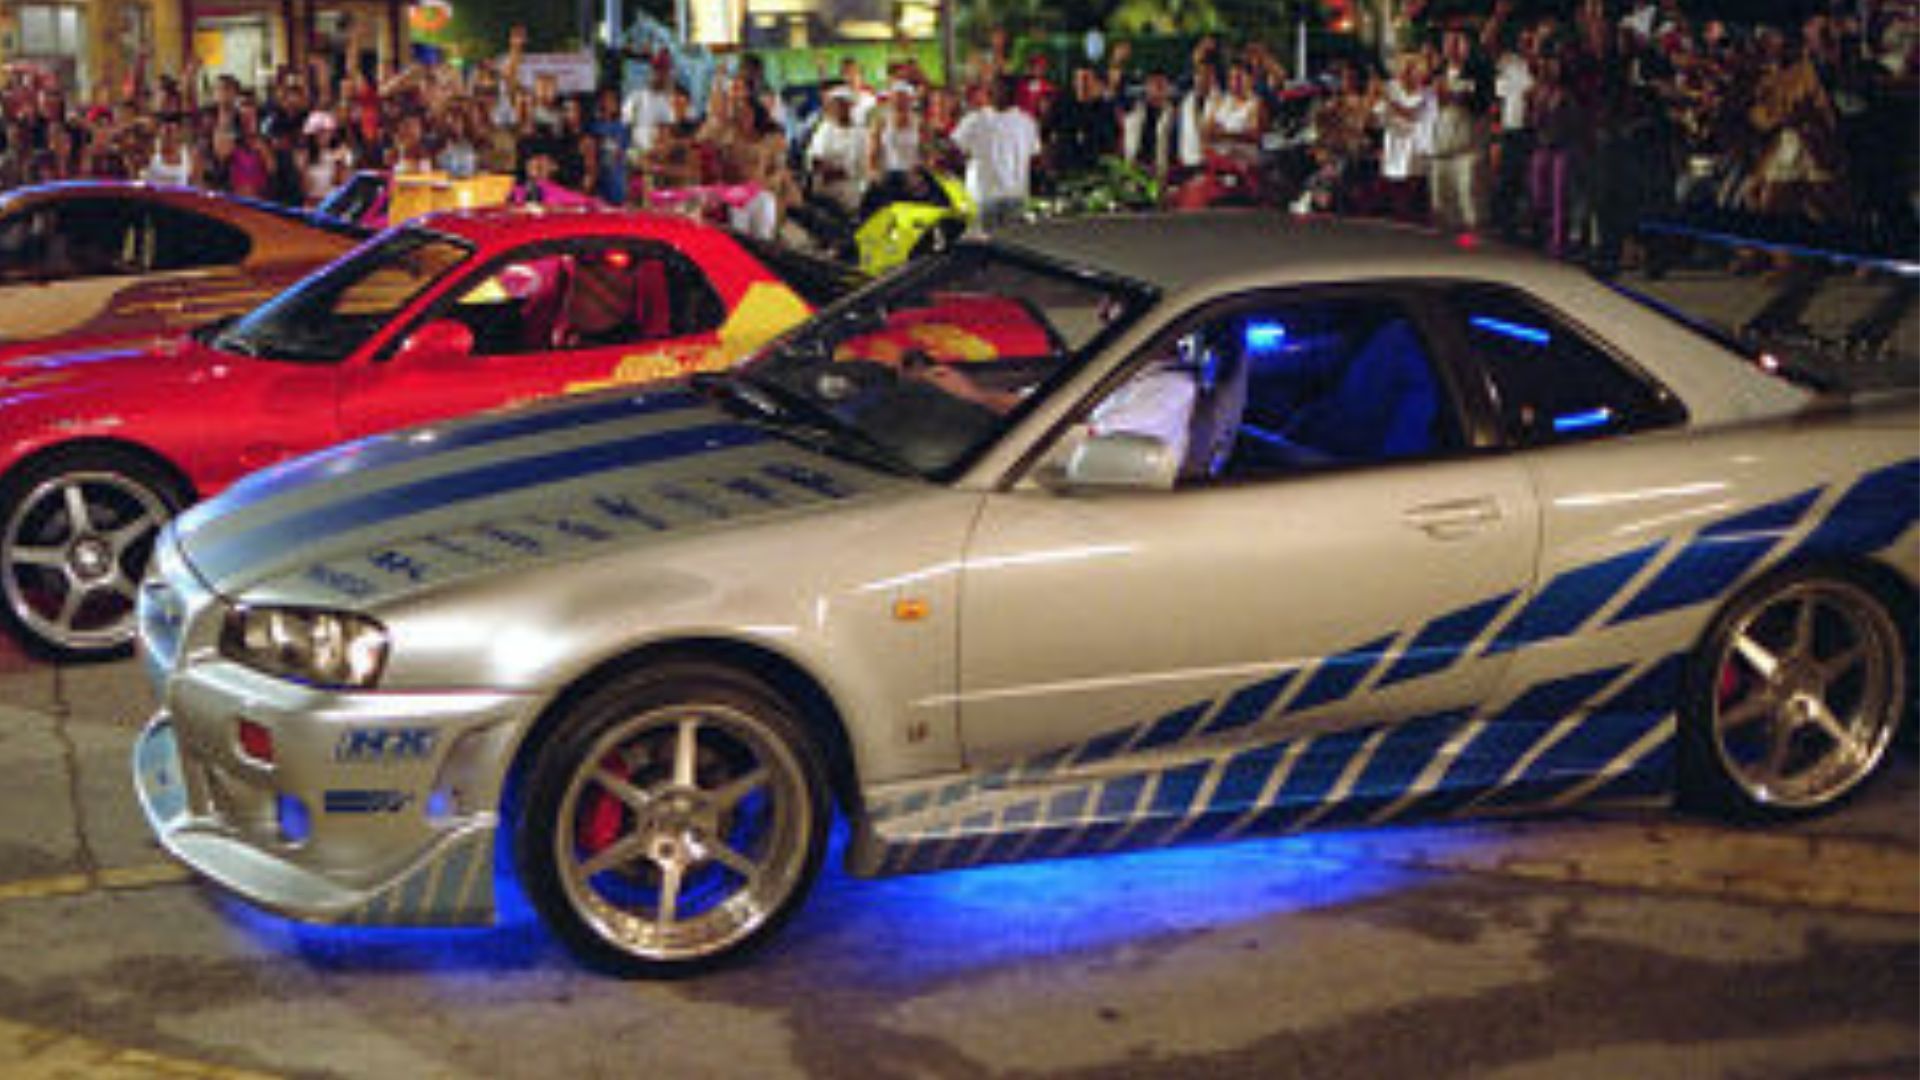 Fast & Furious Cars: Top 20 Vehicles From the Blockbuster Movies